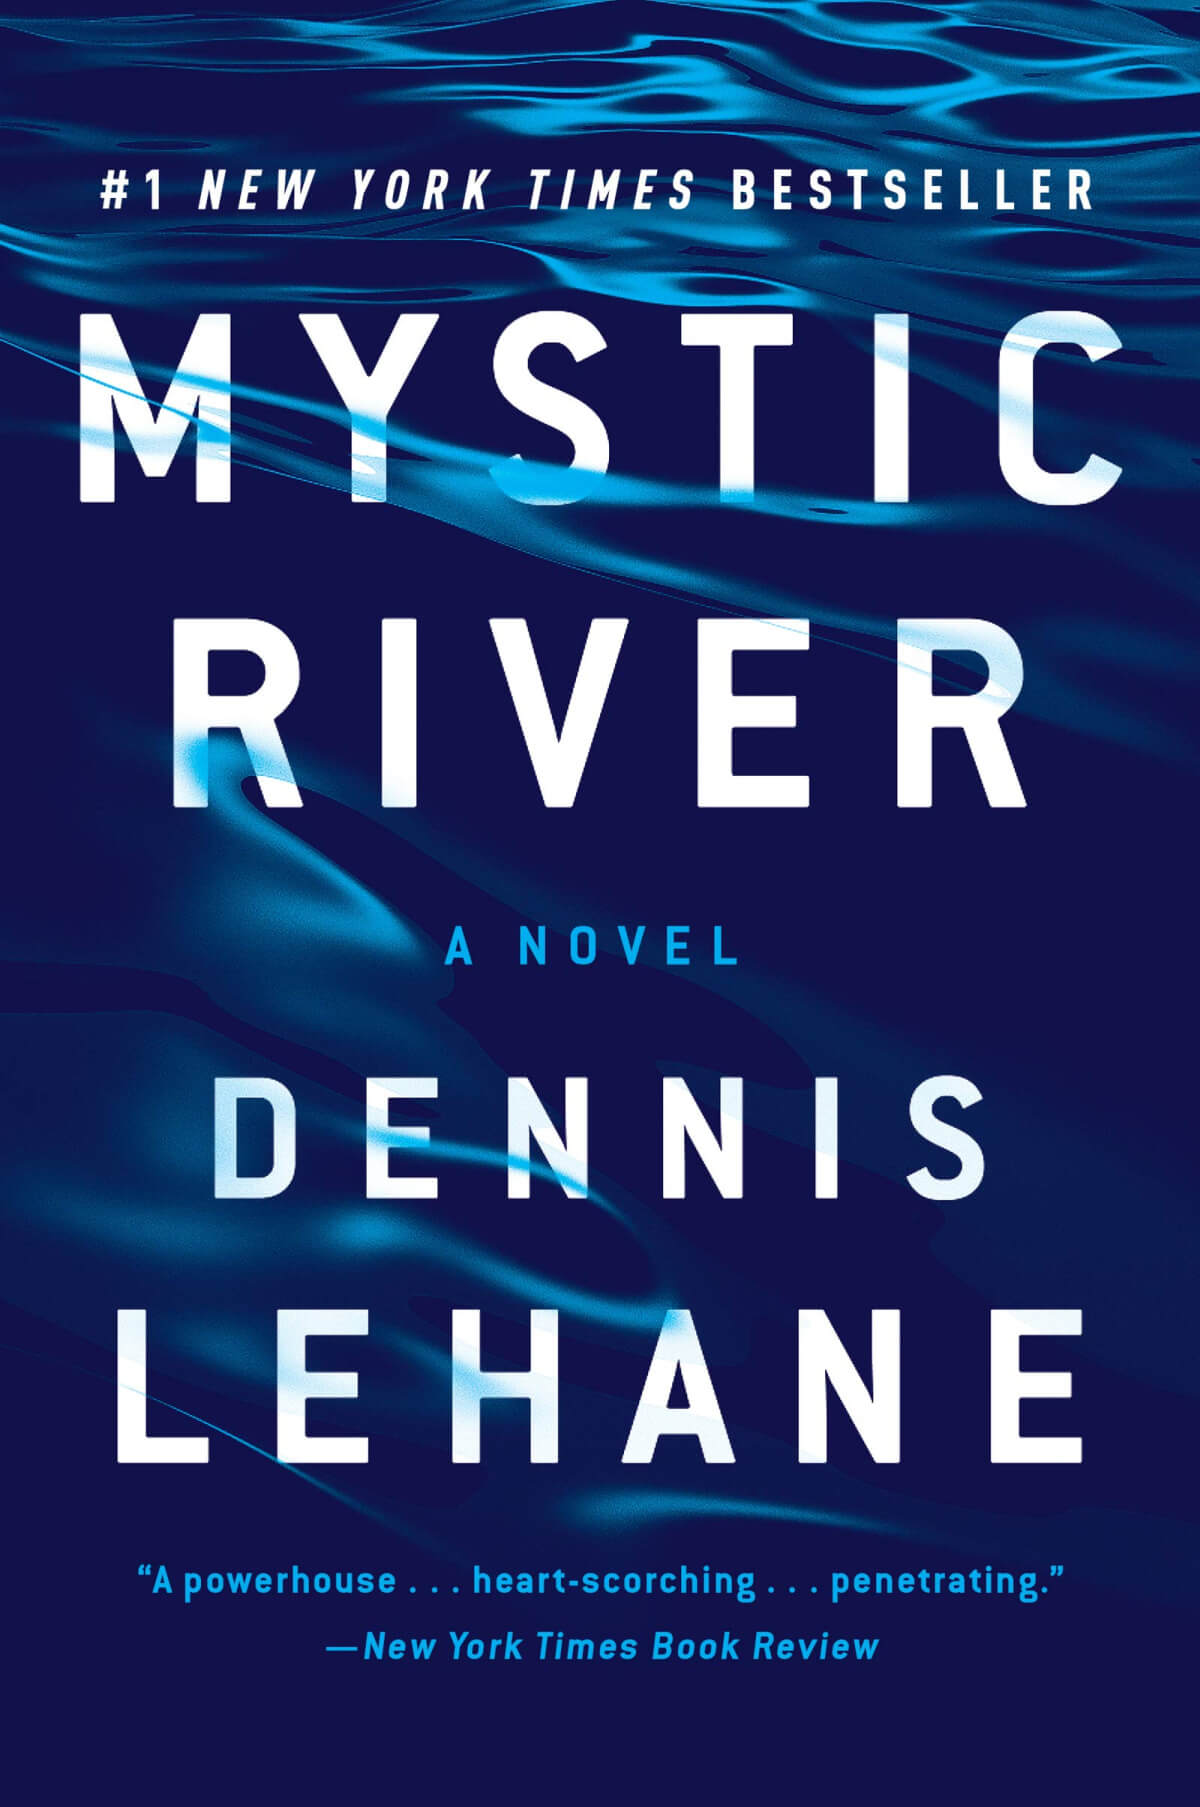 In Sunday Snippets 8/27/23, this is the book "Mystic River" by Dennis Lehane